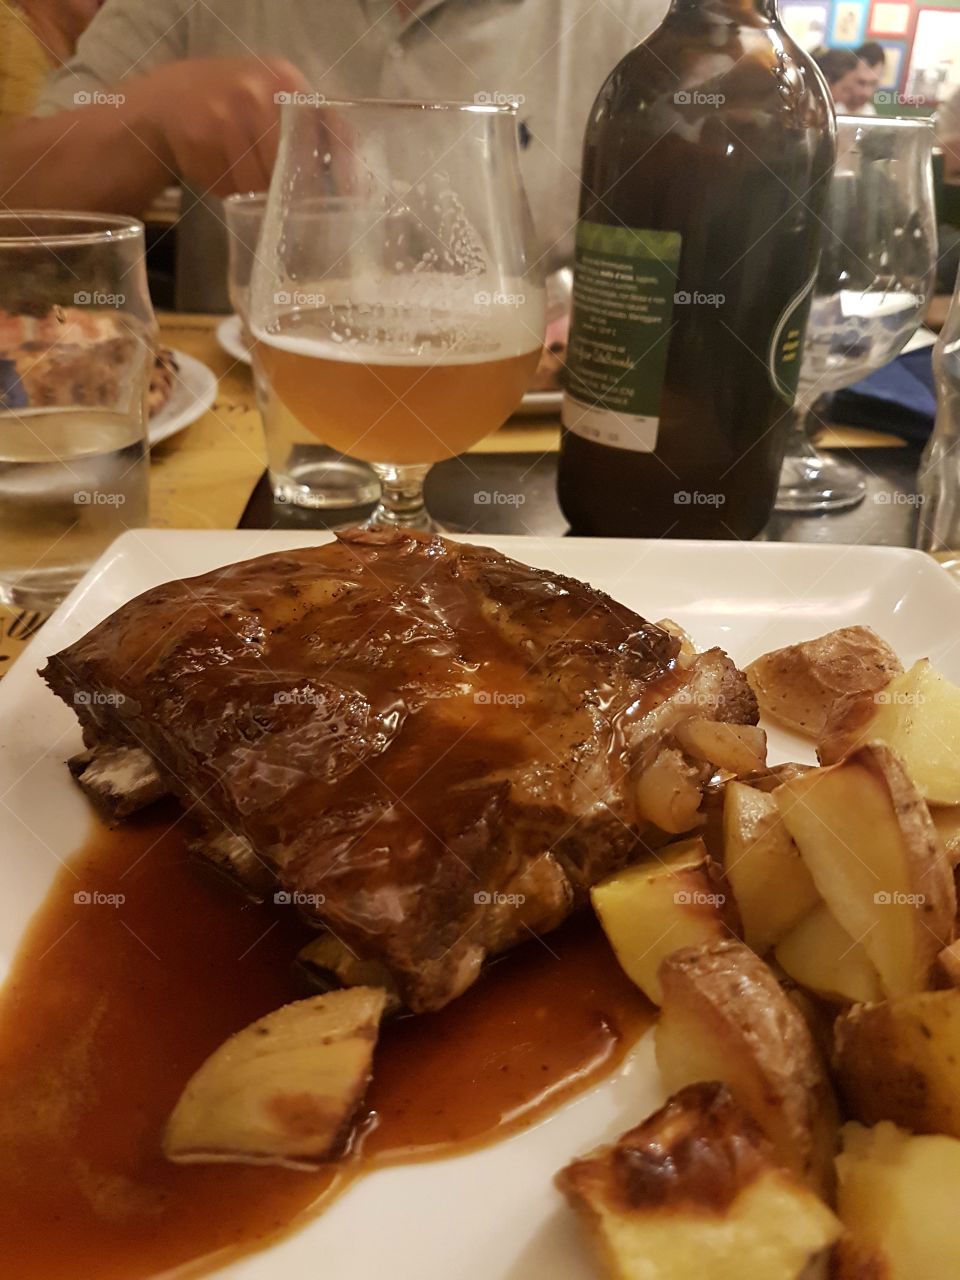 Baked Pork ribs with potatoes and a glass of beer